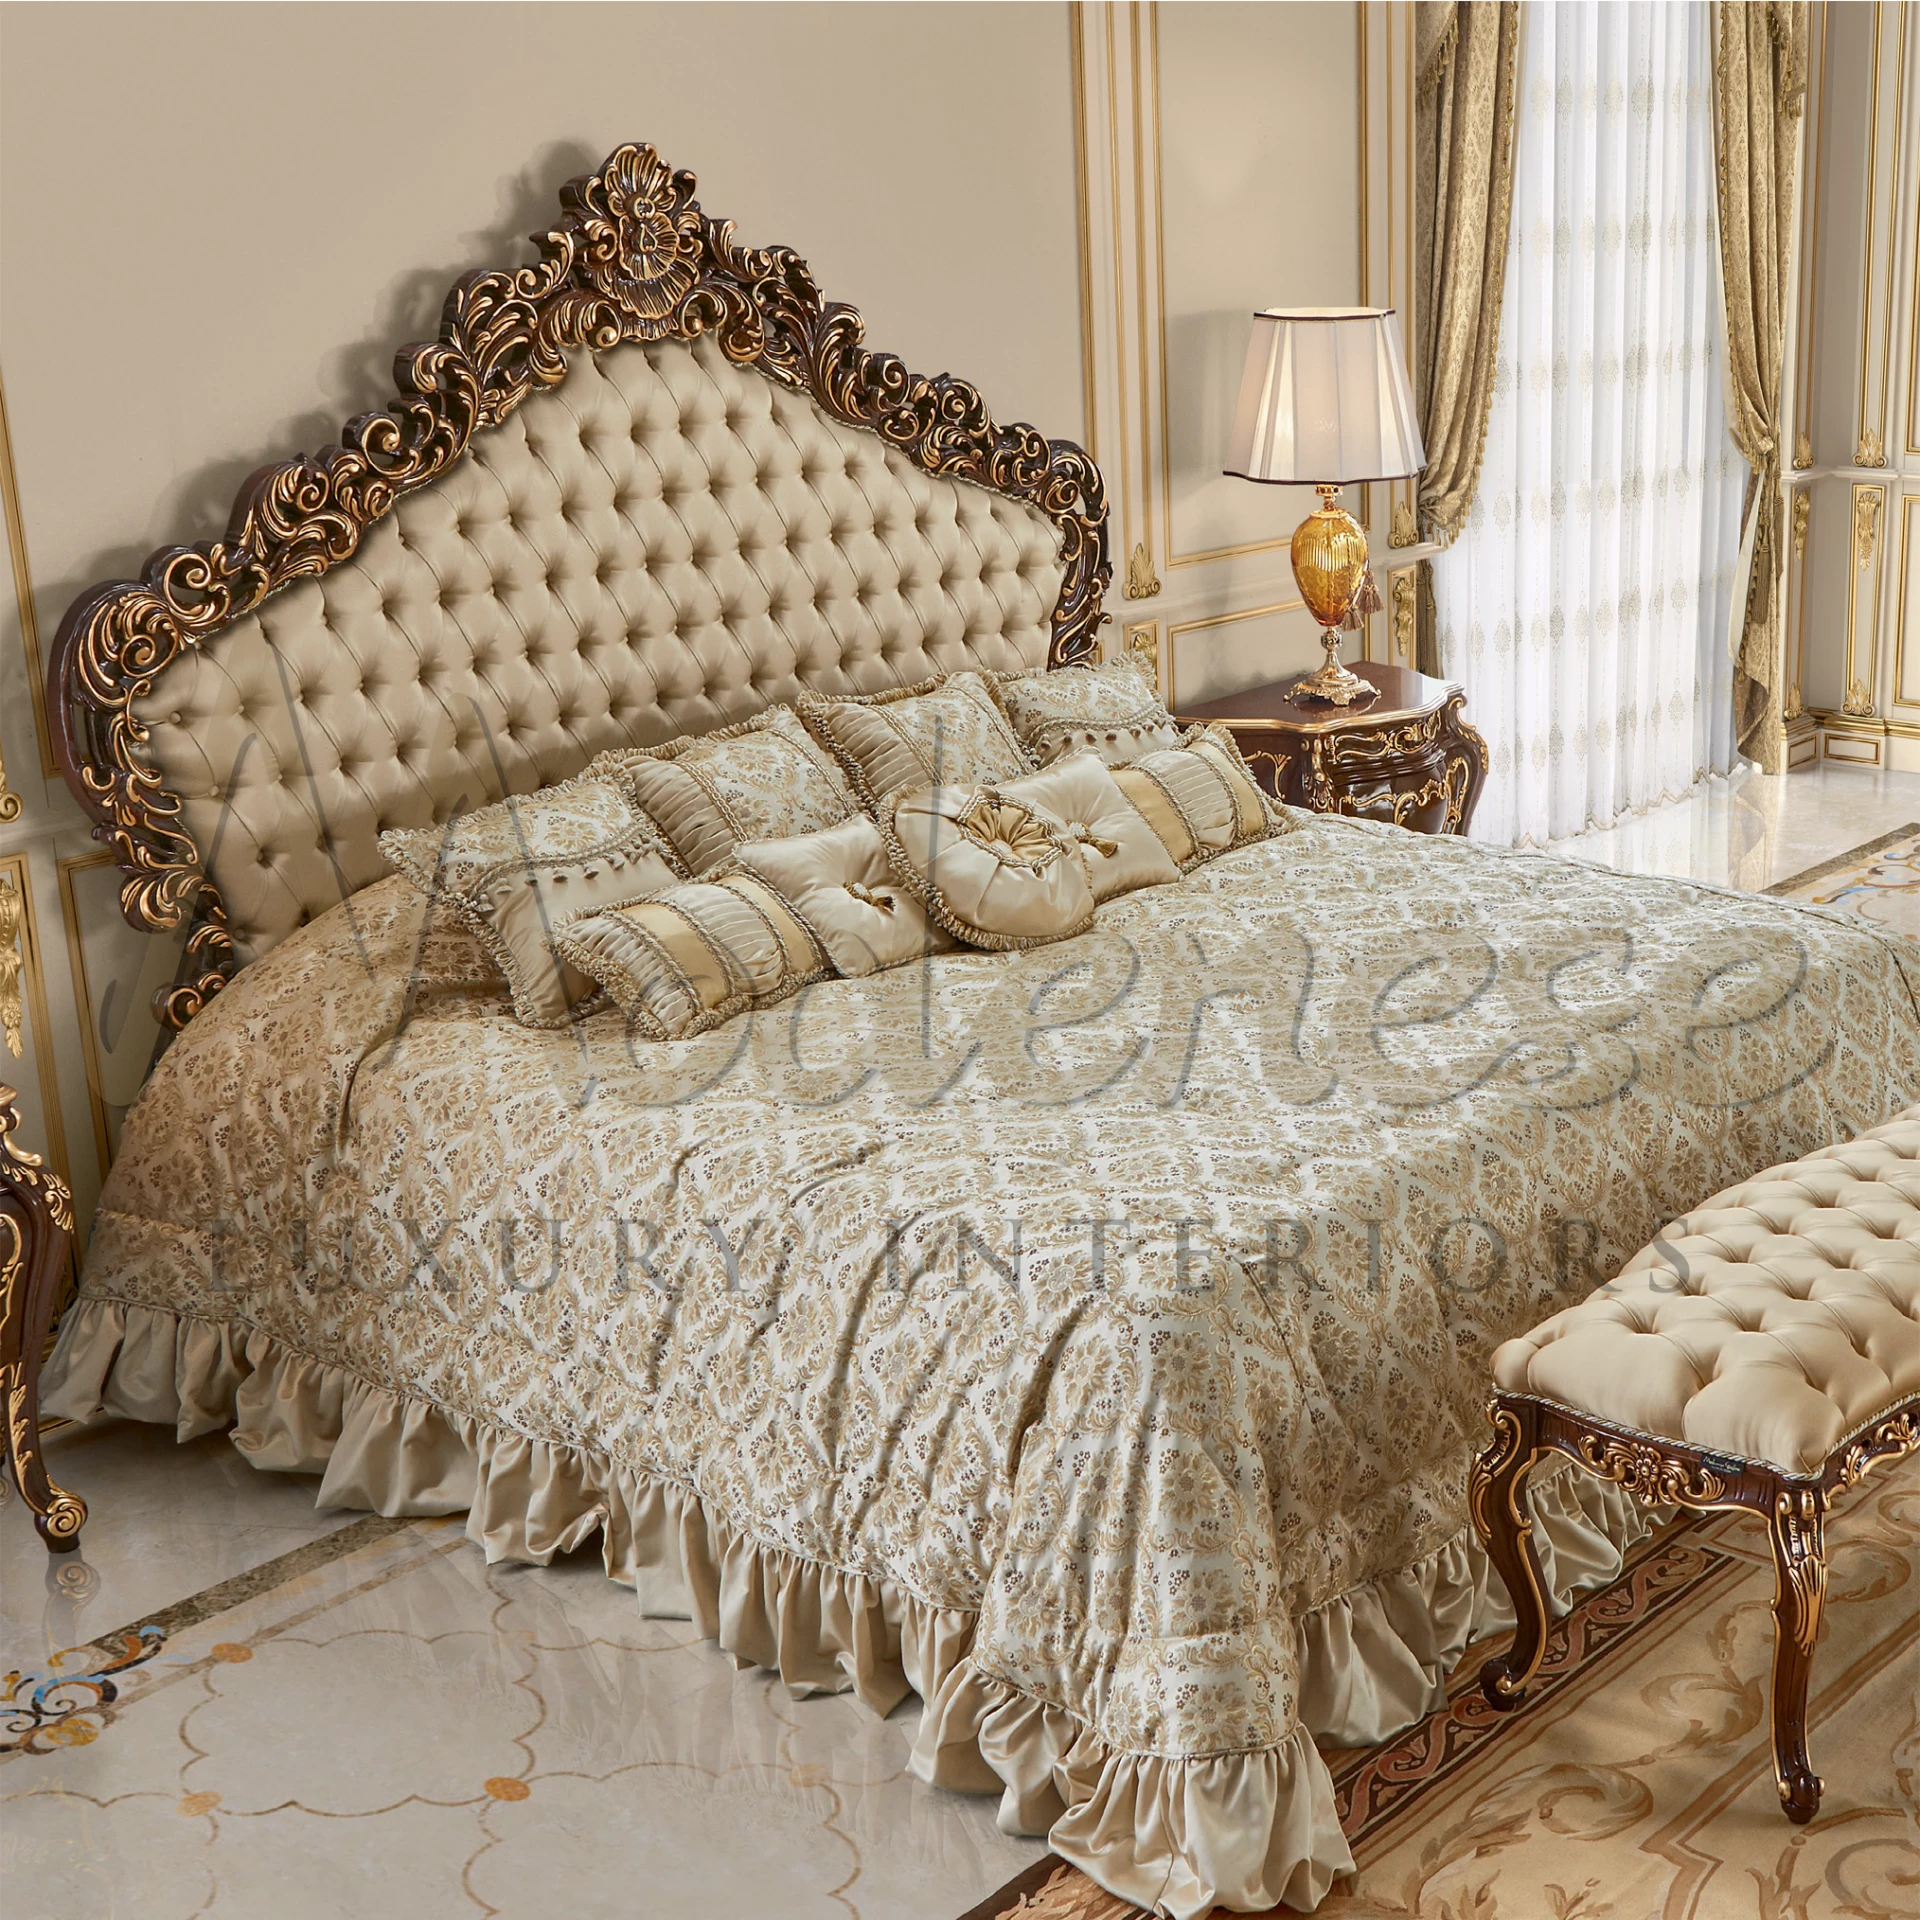 Luxurious and elegant, the Beige Luxury Bed Cover by Modenese offers a blend of high-quality textiles and sophisticated design.